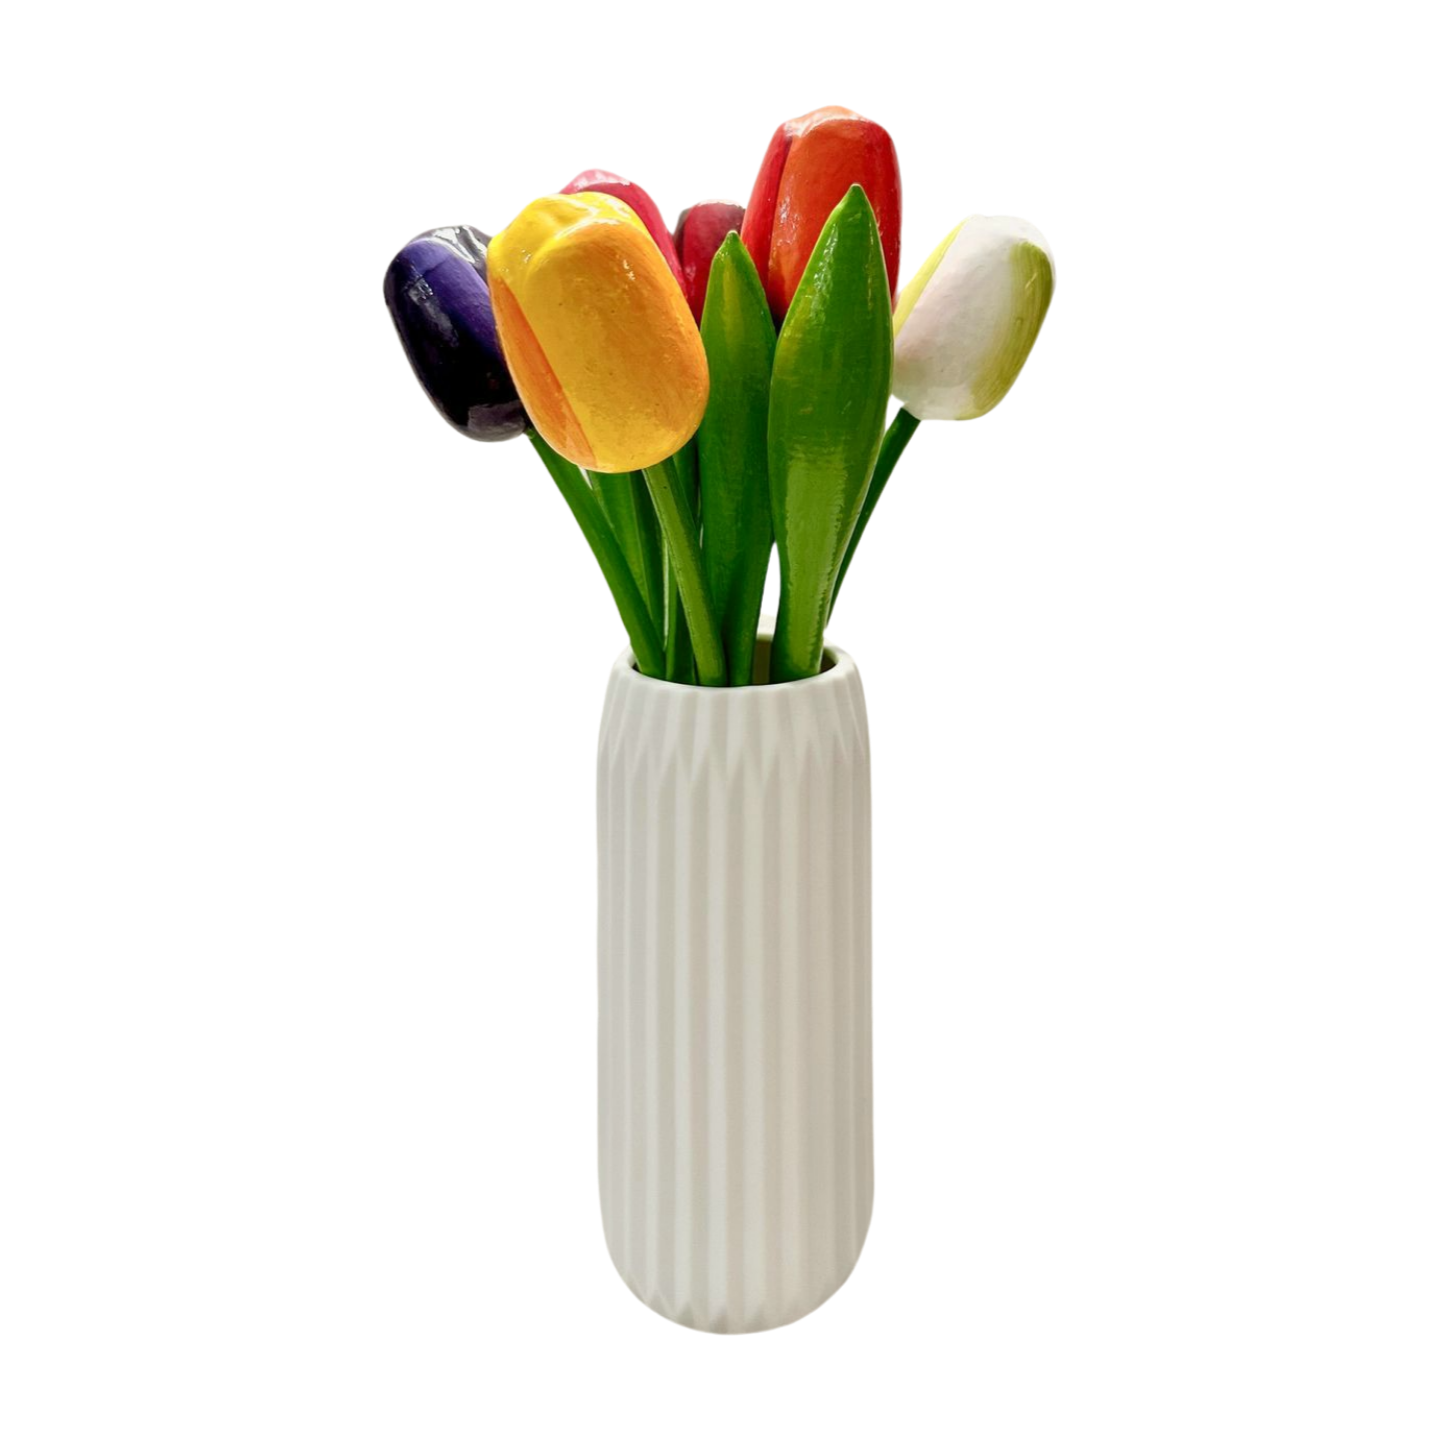 Wooden Dutch Tulips shown here in a vase, with all six color variations.